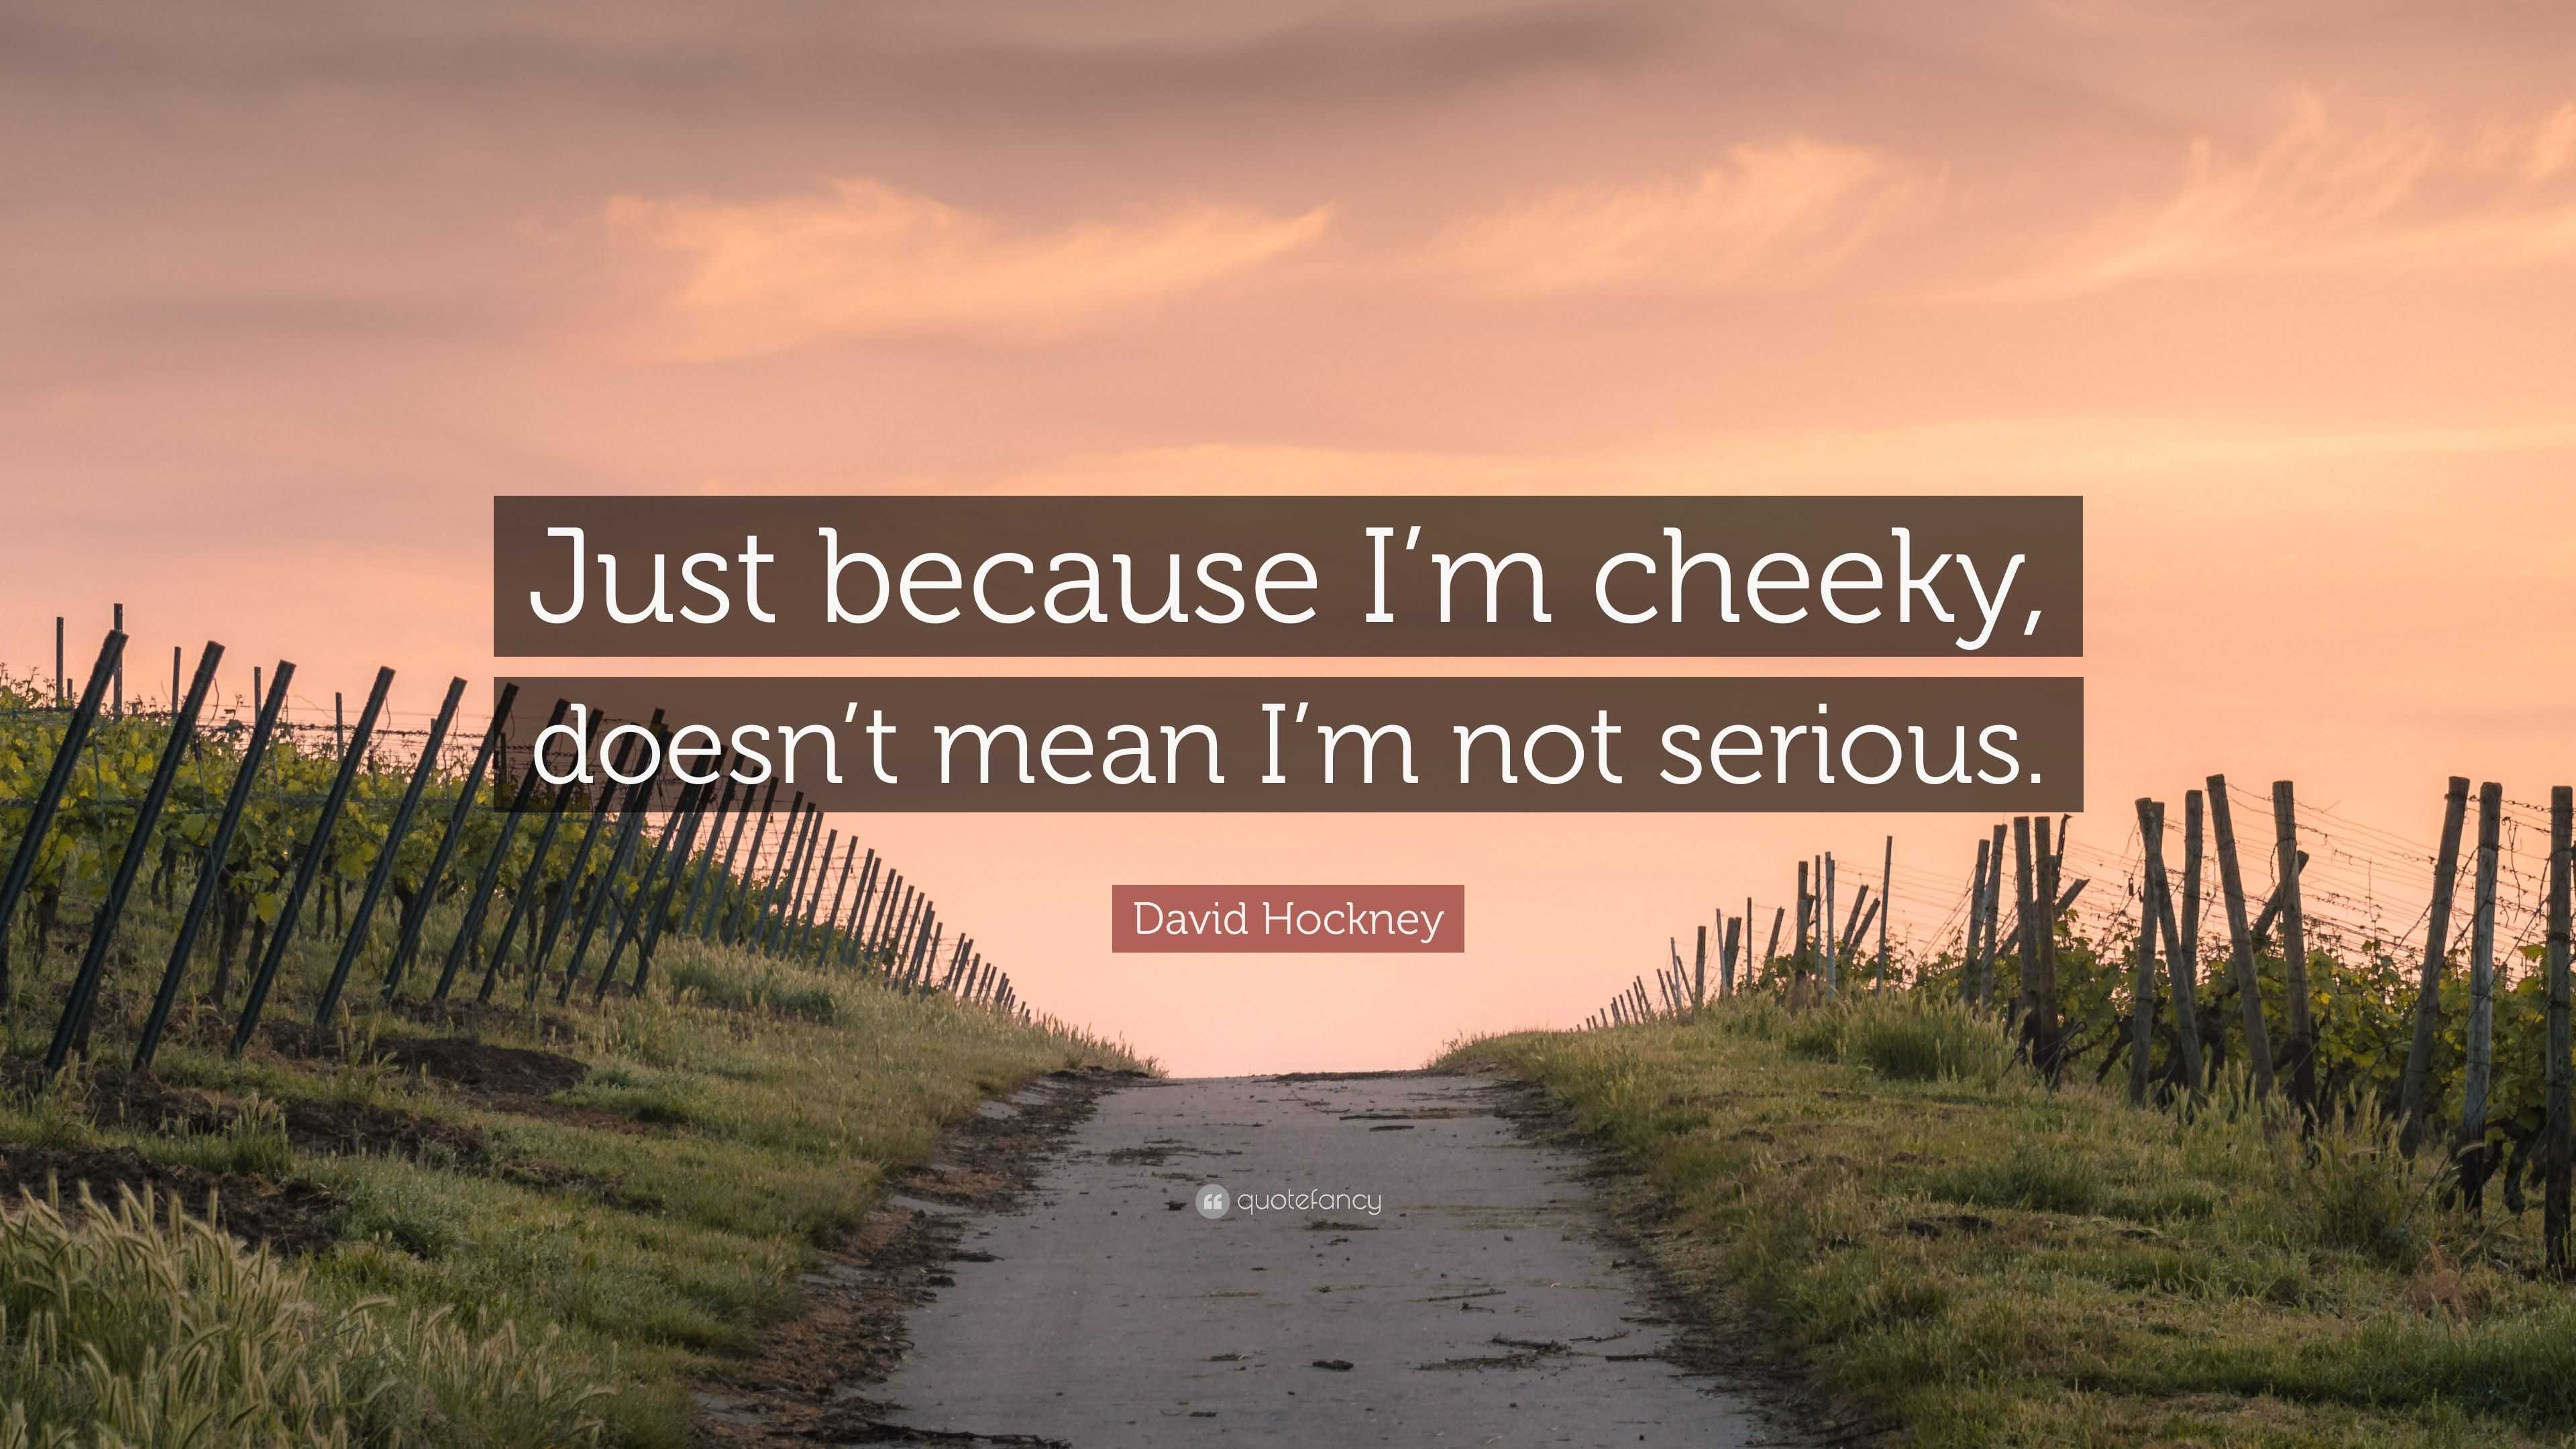 https://quotefancy.com/media/wallpaper/3840x2160/2733567-David-Hockney-Quote-Just-because-I-m-cheeky-doesn-t-mean-I-m-not.jpg